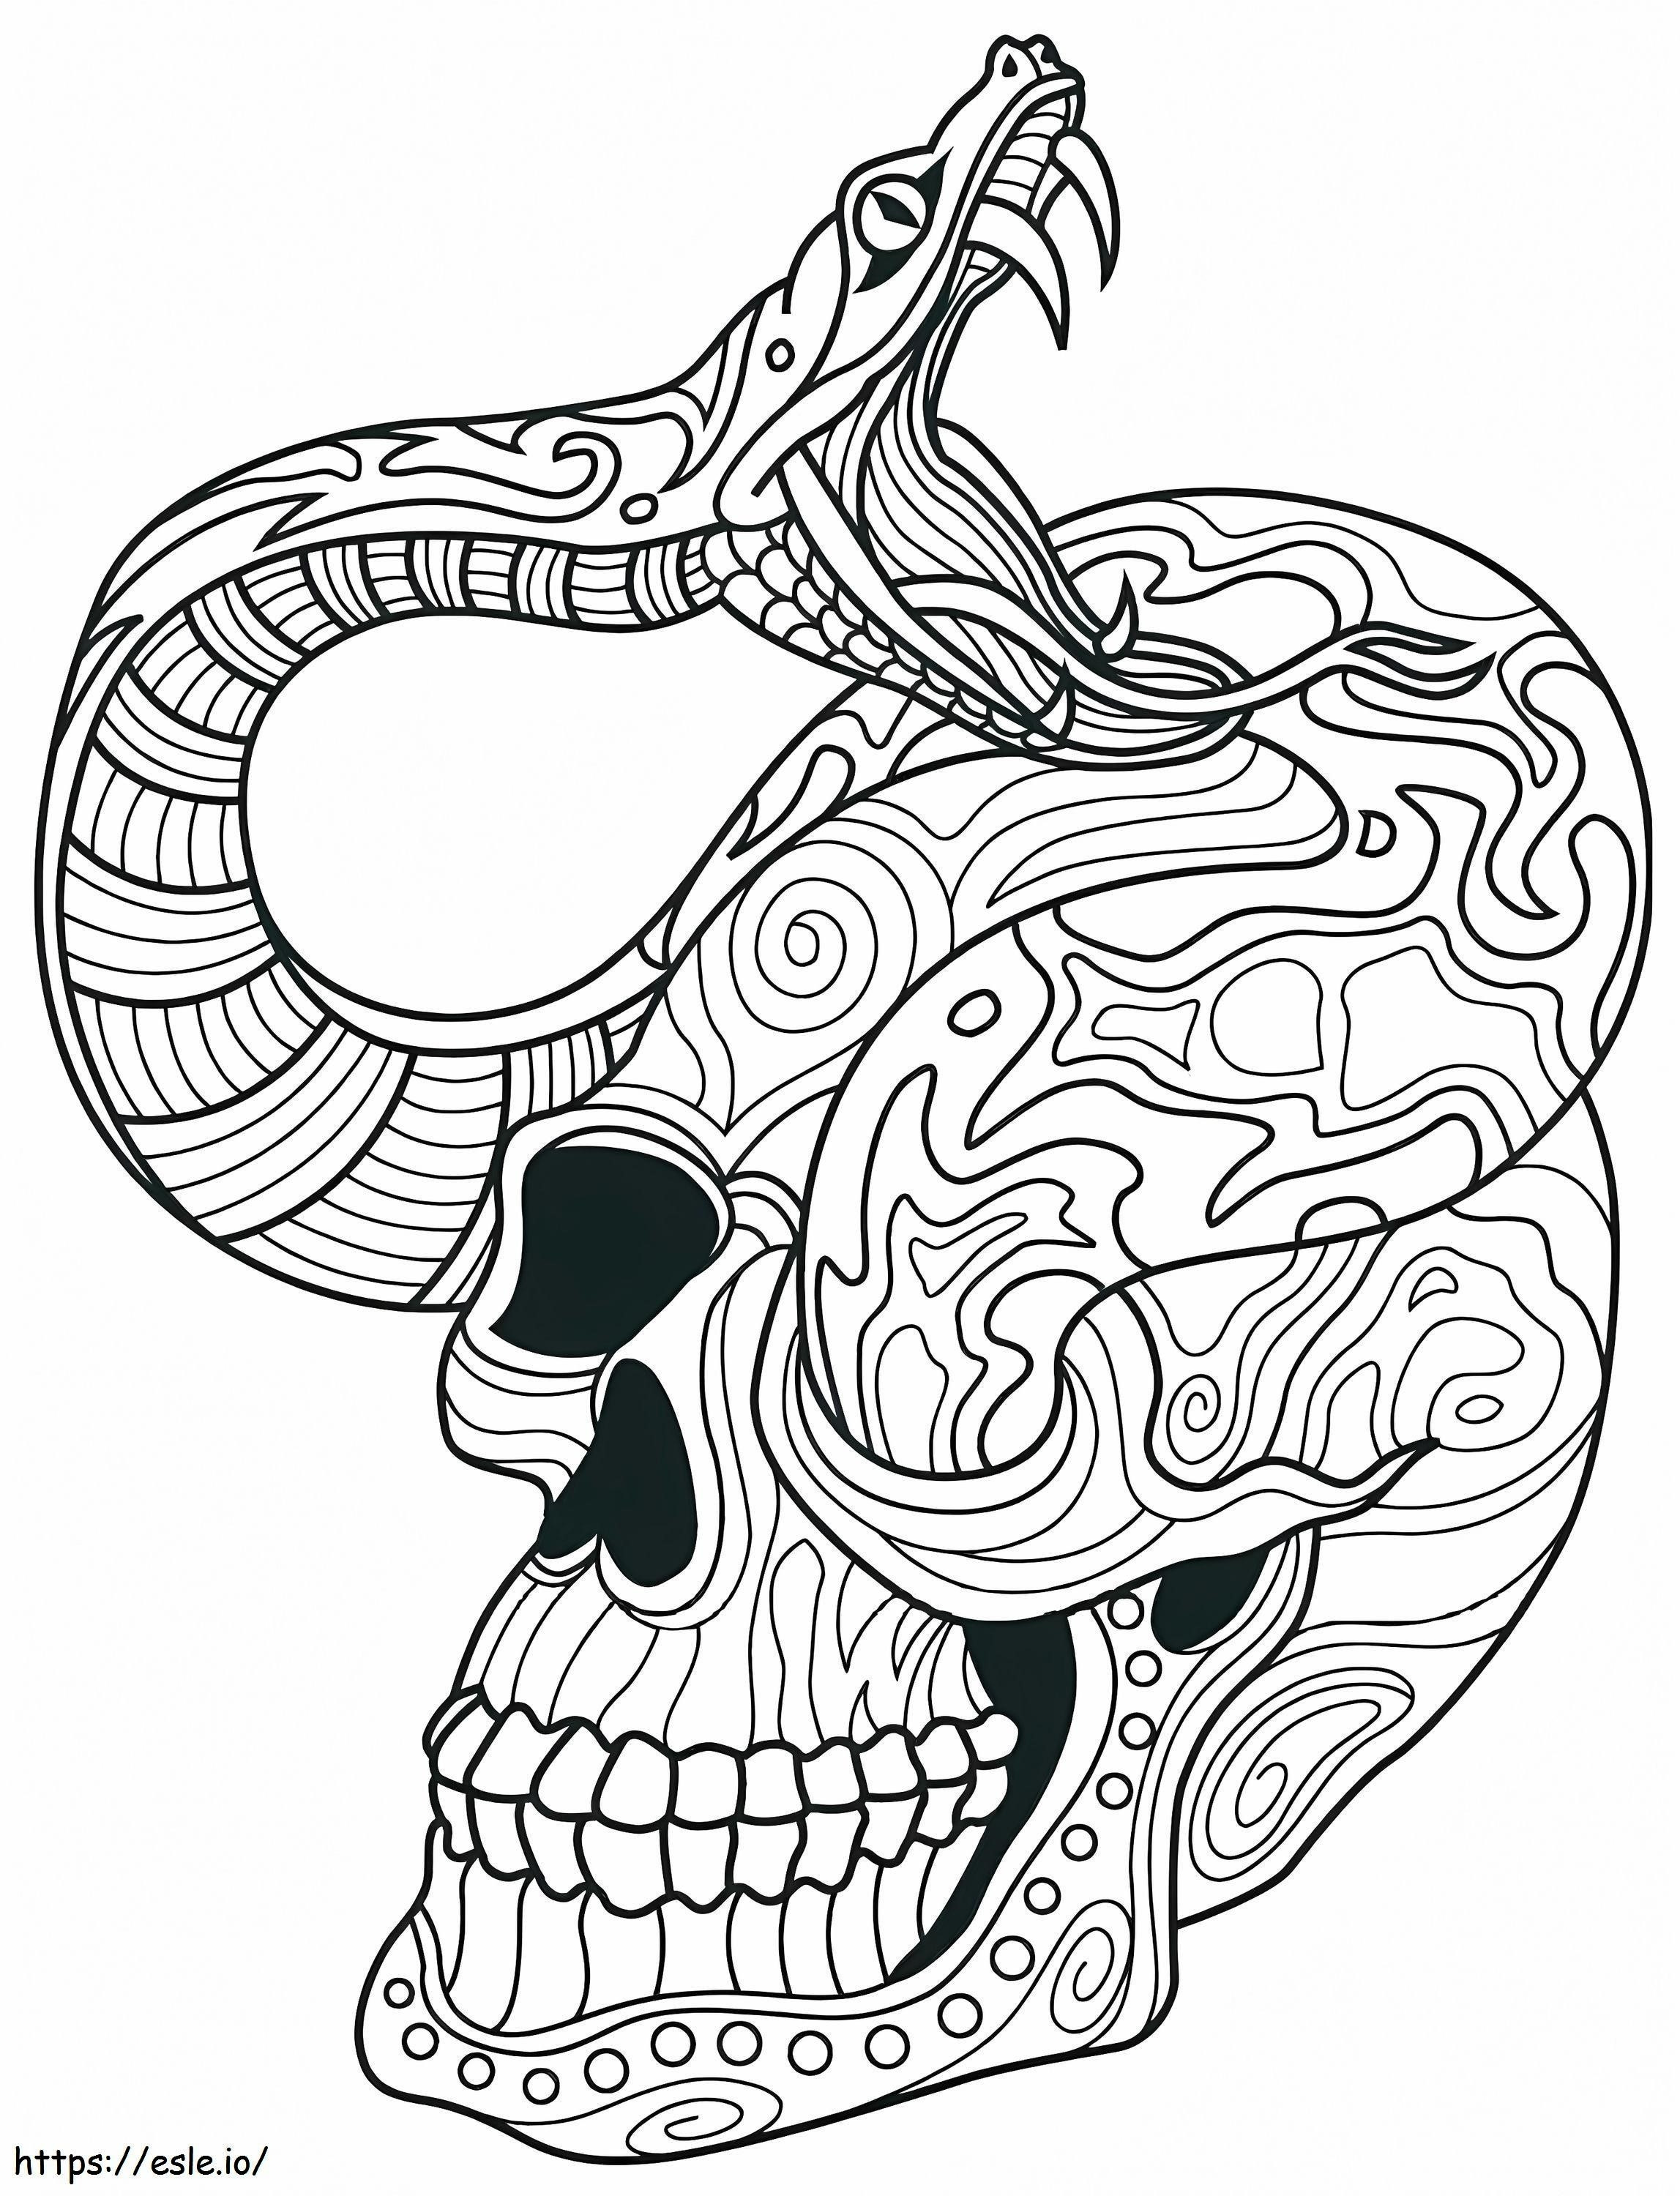 1539920986 Day Of The Dead Skull Day Of The Dead Skulls Day Of The Dead Snake Day Of The Dead Girl Skull coloring page